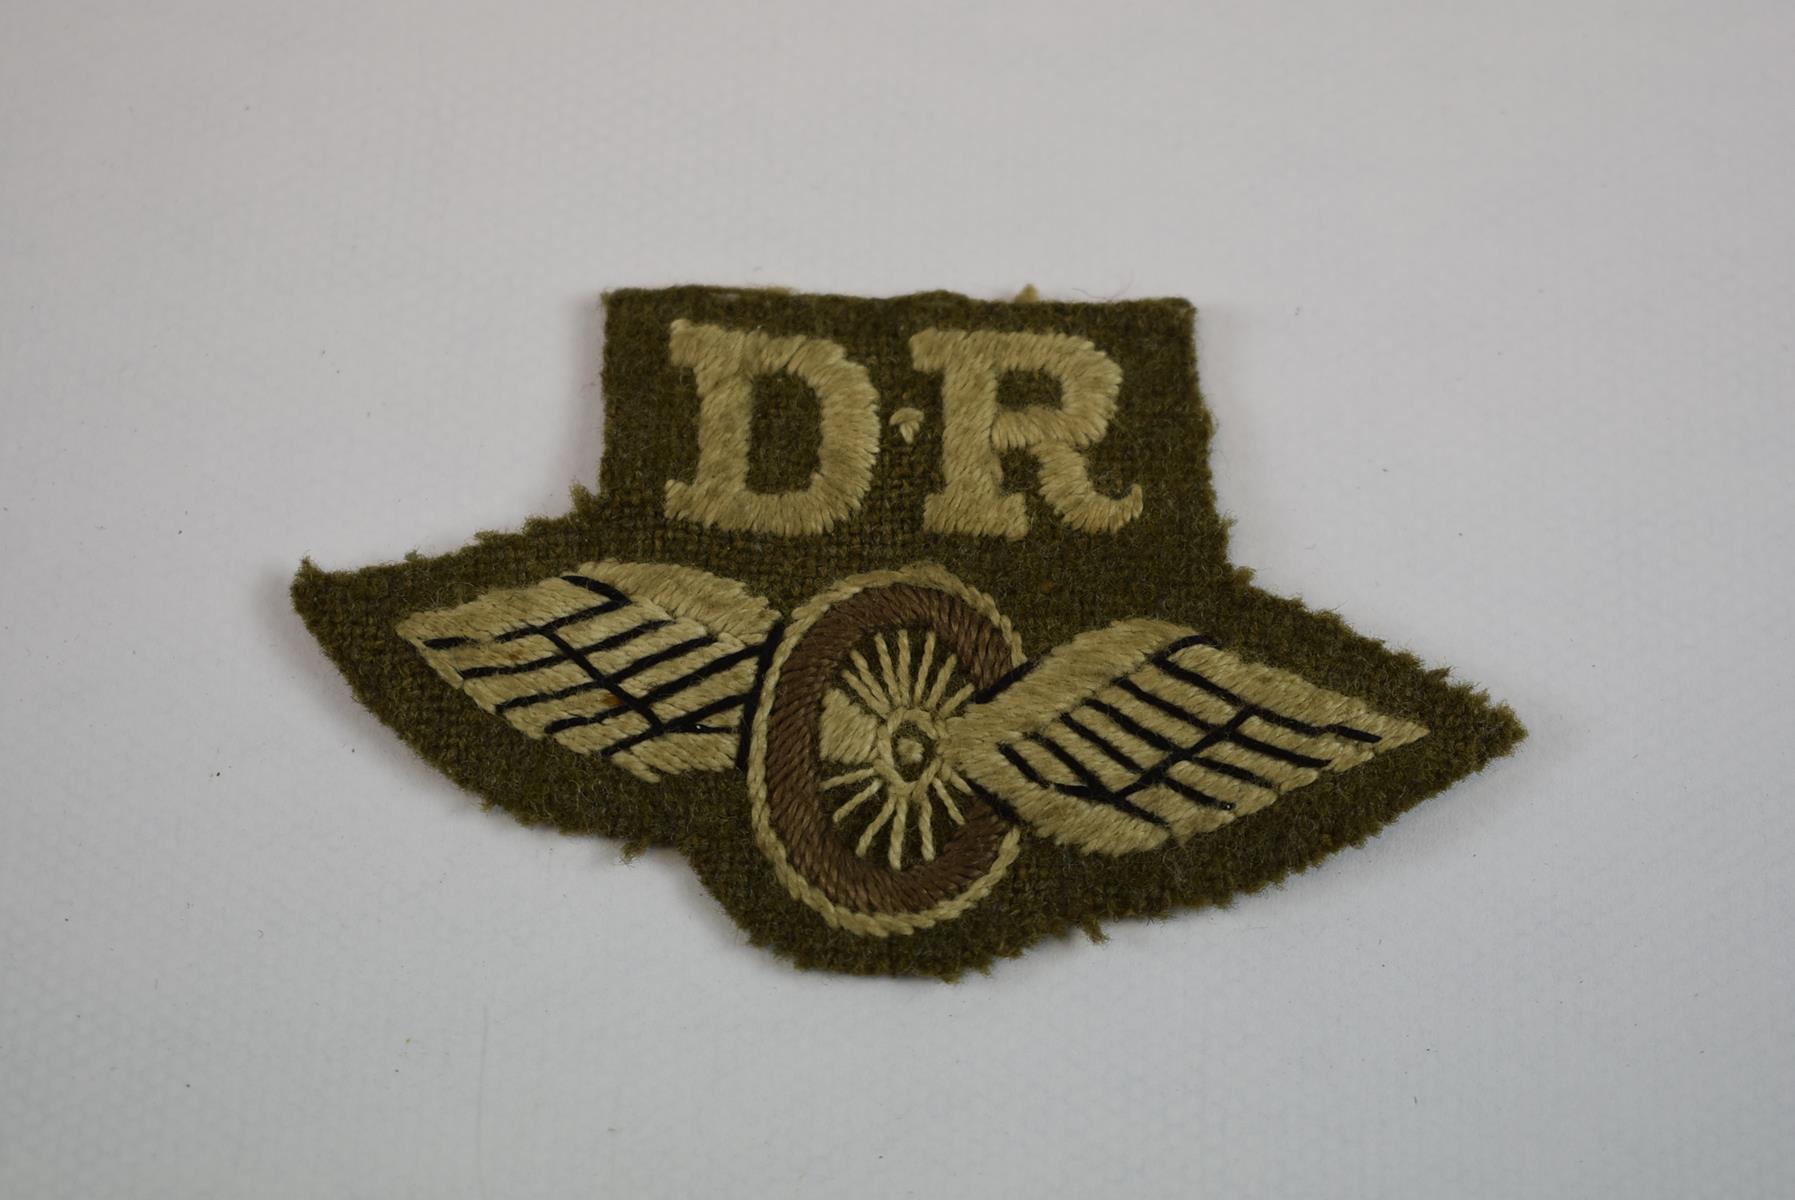 CLOTH INSIGNIA. Comprising a pair of printed 4th Infantry Division arm badges, two (one printed, one